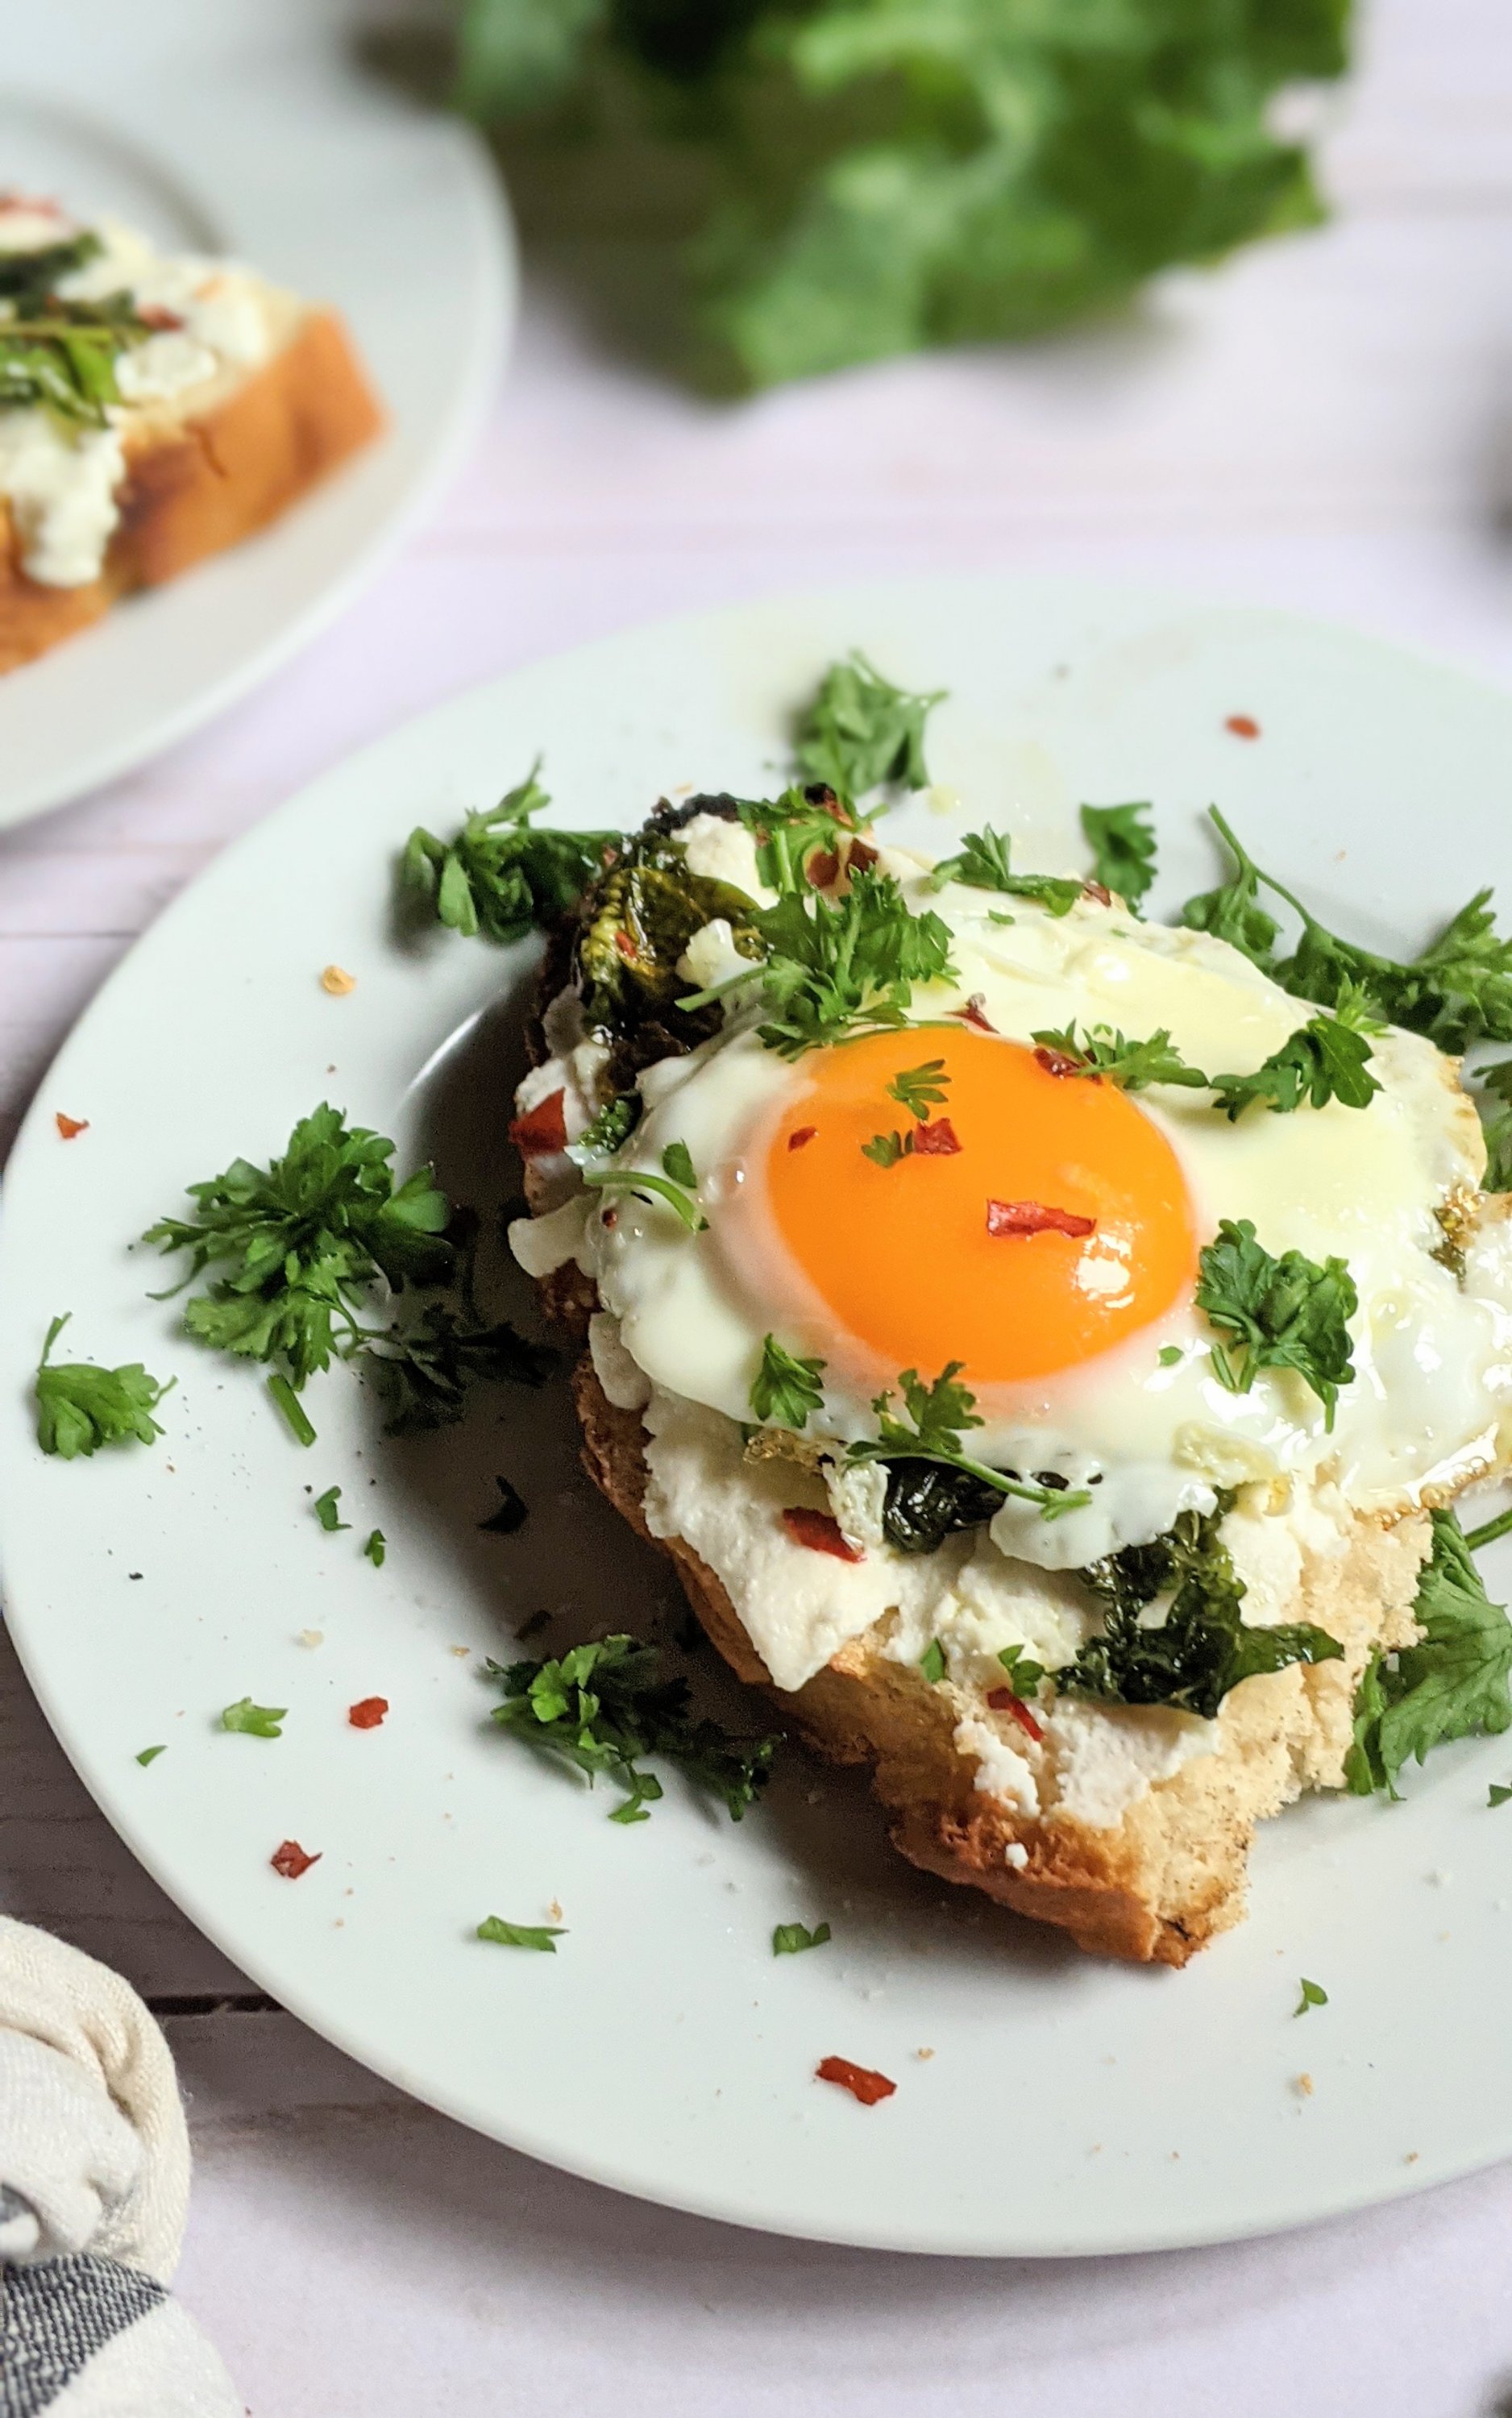 ricotta and egg toast with creamy cheese recipe gluten free bread with ricotta cheese sauteed garlic and kale a fried egg and parsley healthy breakfast high protein